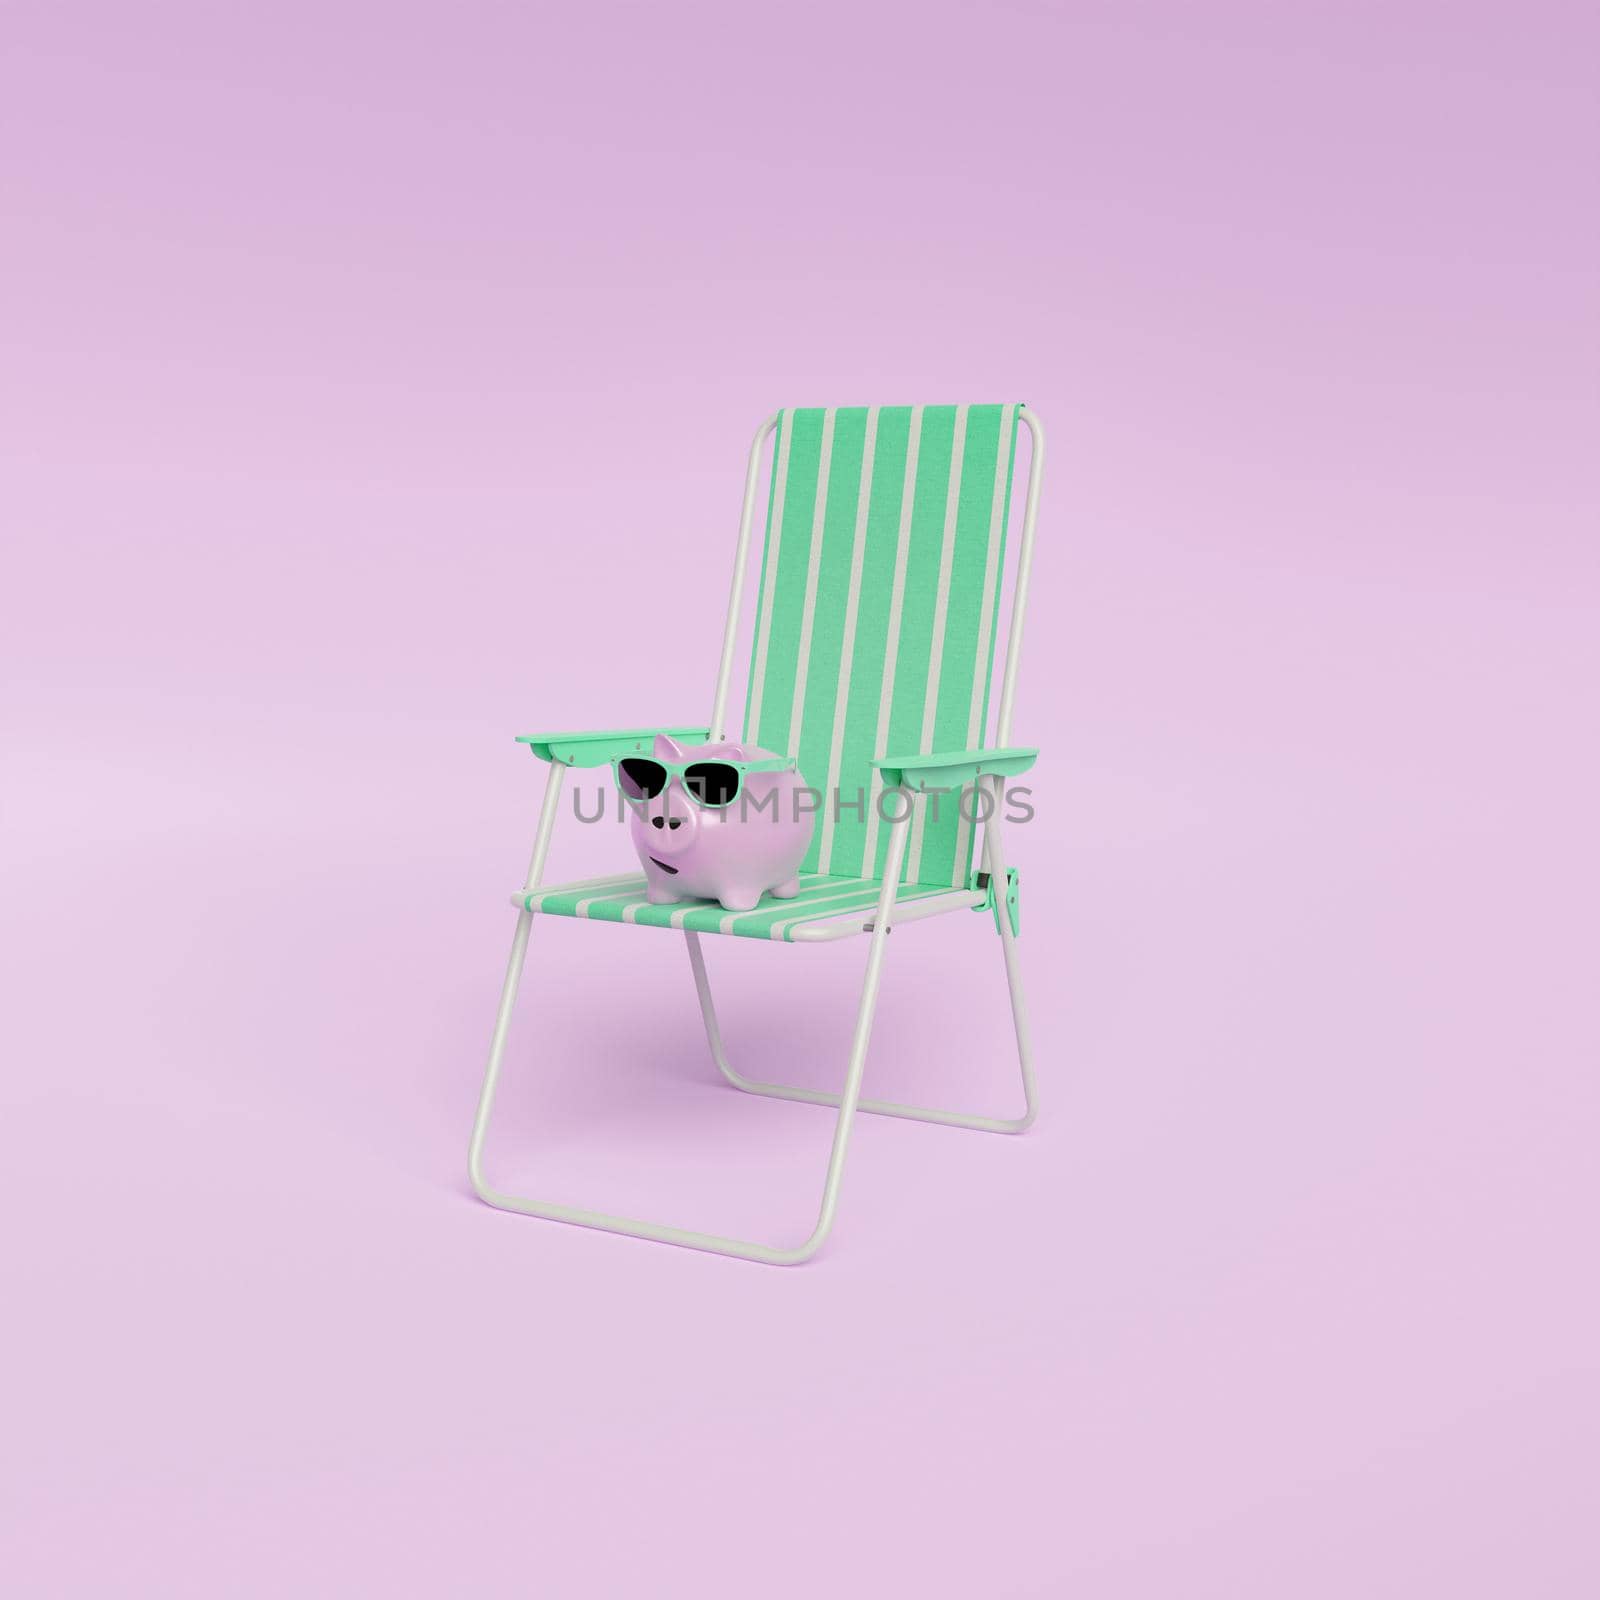 Piggy Bank With Deckchair by asolano